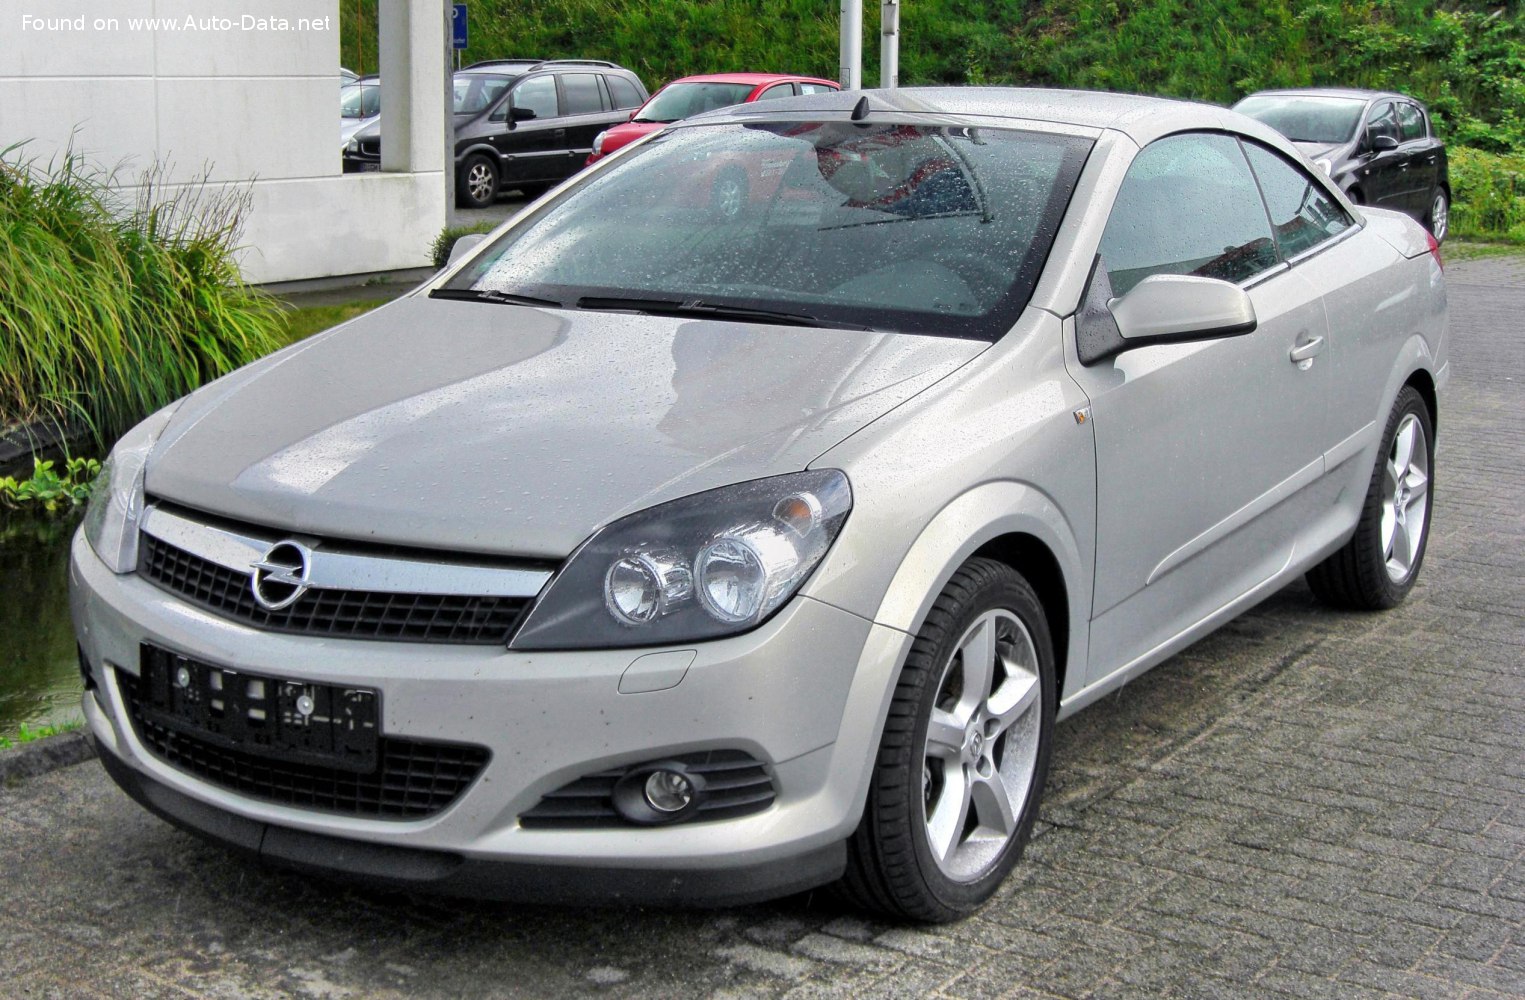 2006 Opel Astra H TwinTop 1.9 CDTI (150 Hp)  Technical specs, data, fuel  consumption, Dimensions